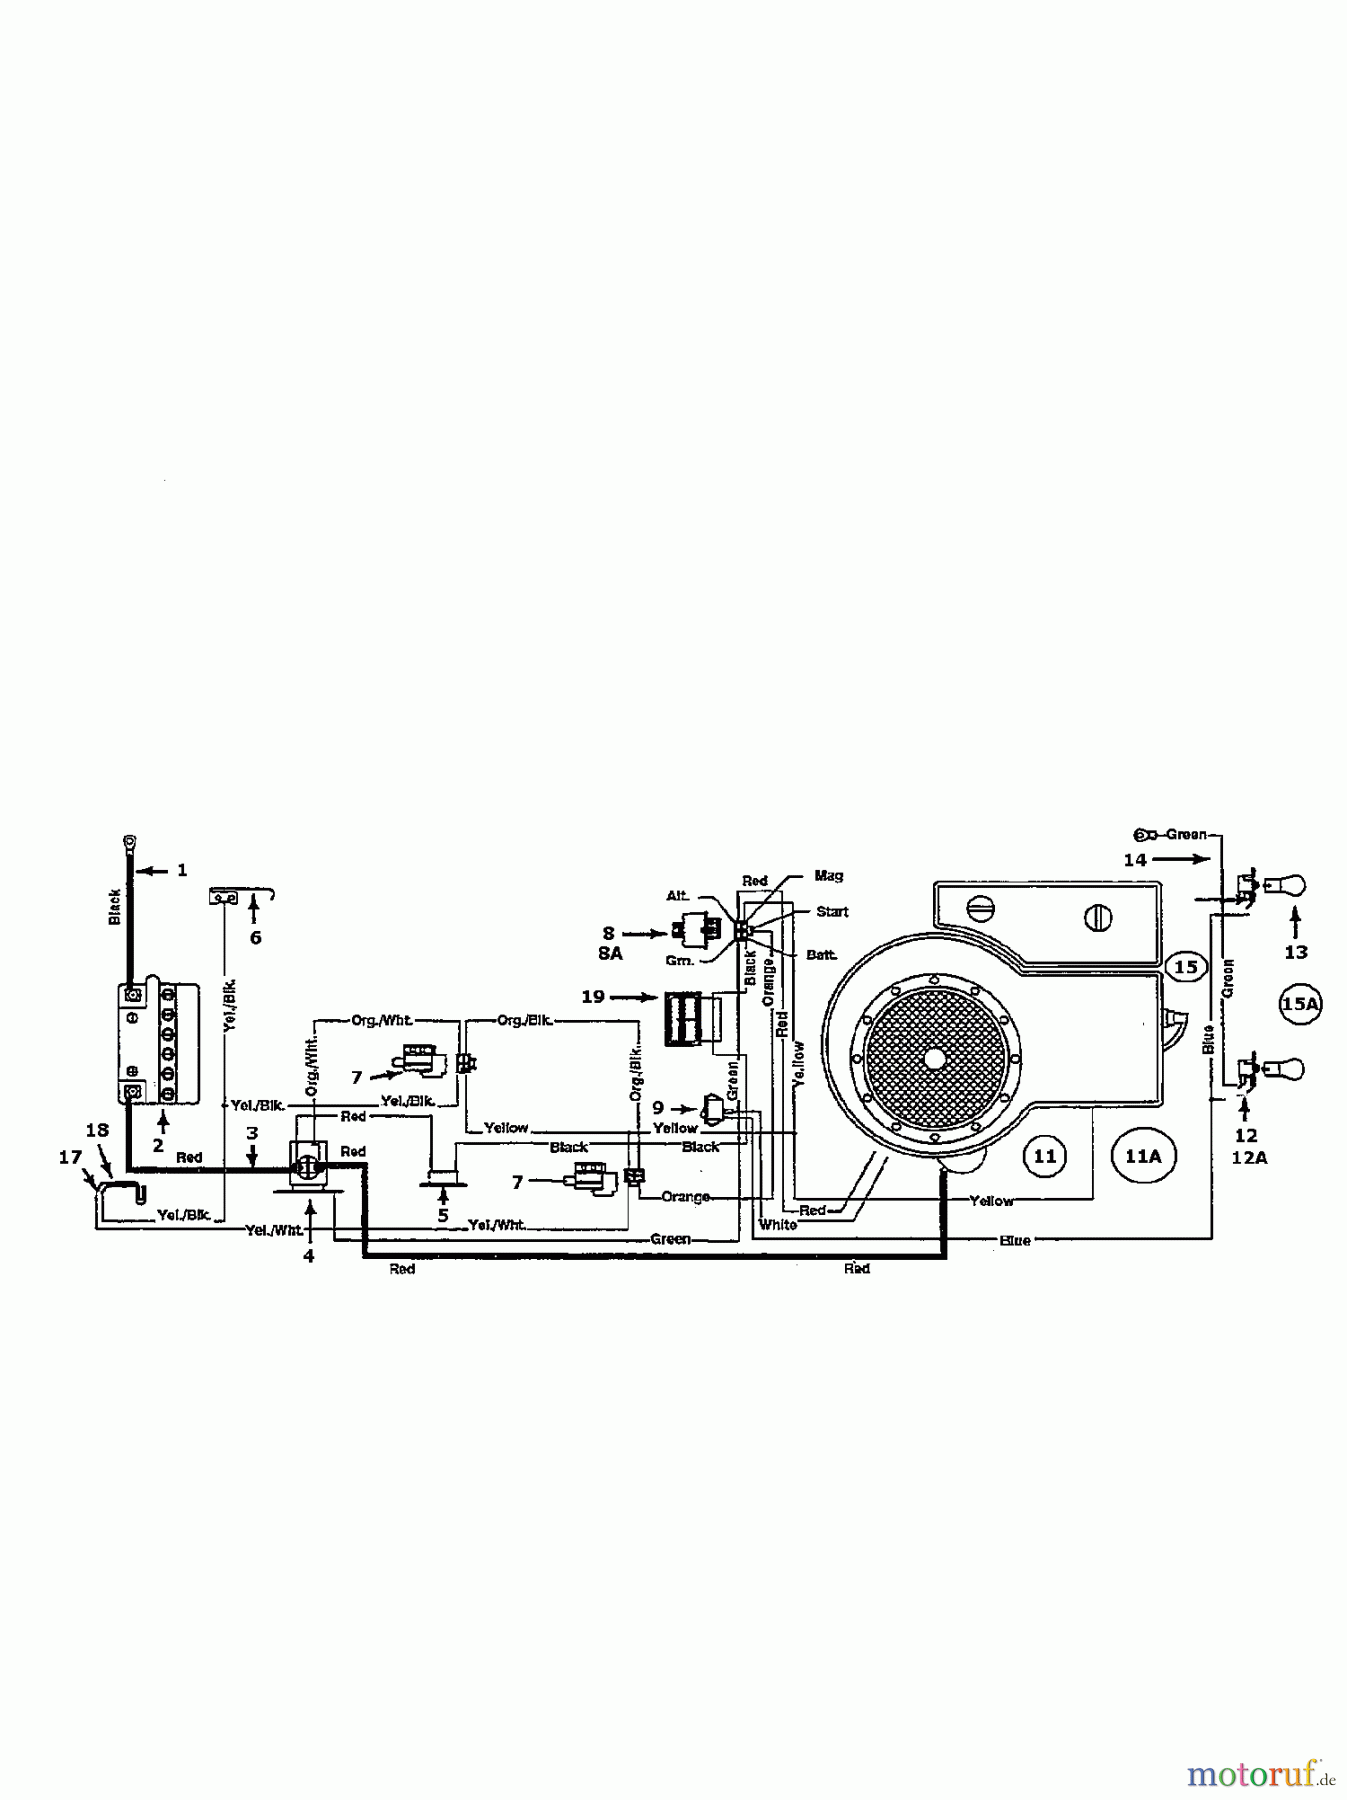  Columbia Lawn tractors 110/810 135B451D626  (1995) Wiring diagram single cylinder